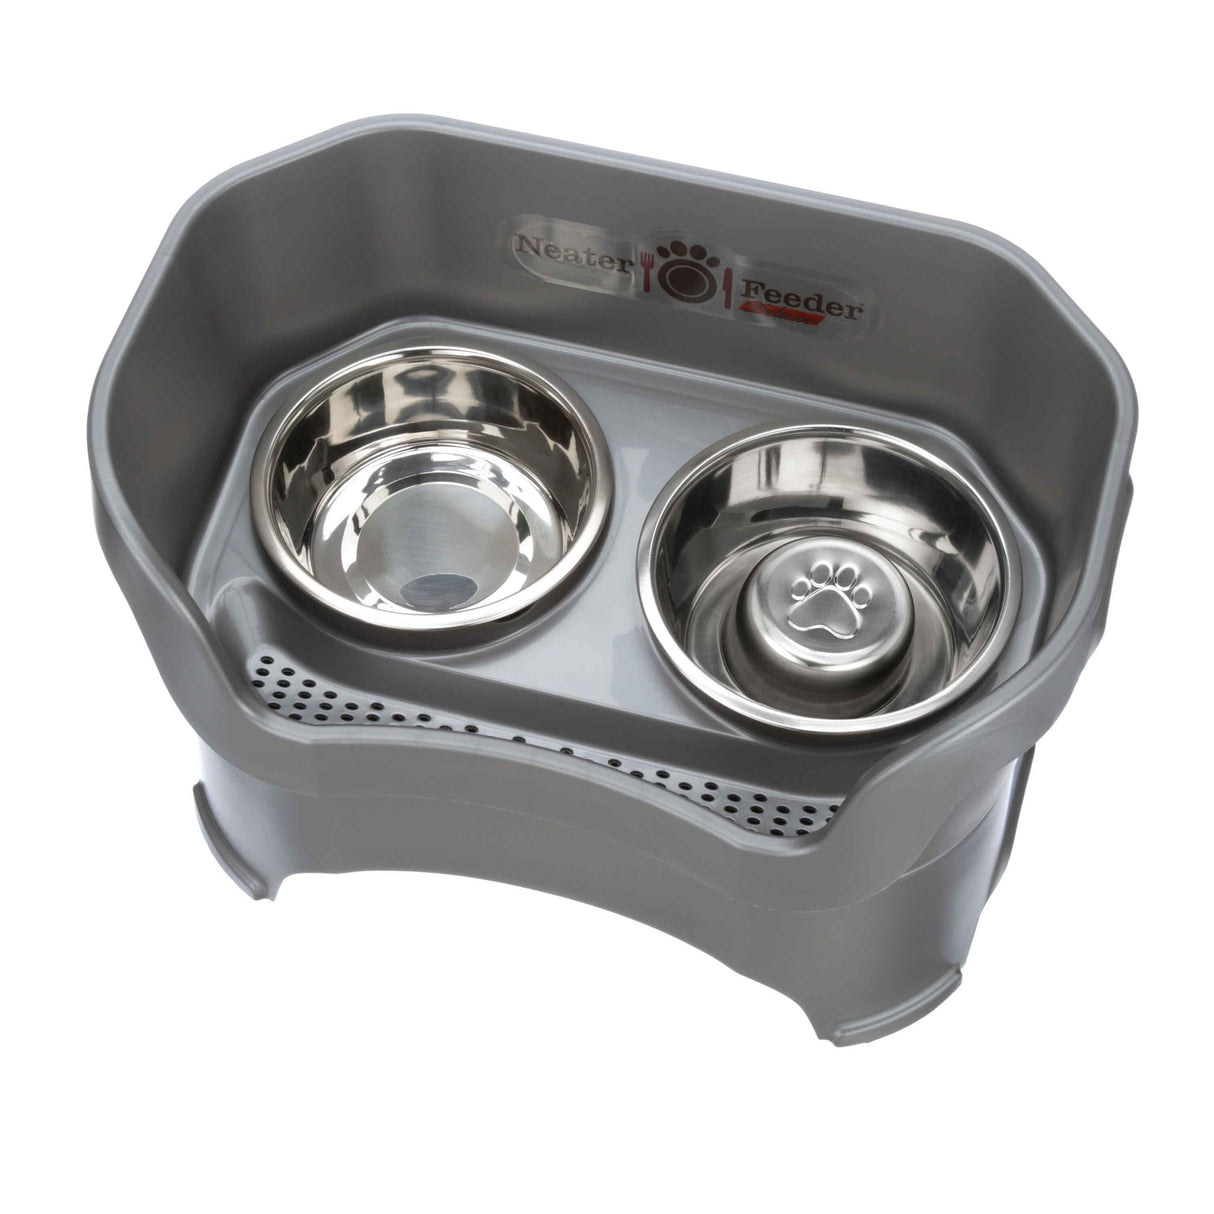 gunmetal gray large DELUXE Neater Feeder with Stainless Steel Slow Feed Bowl